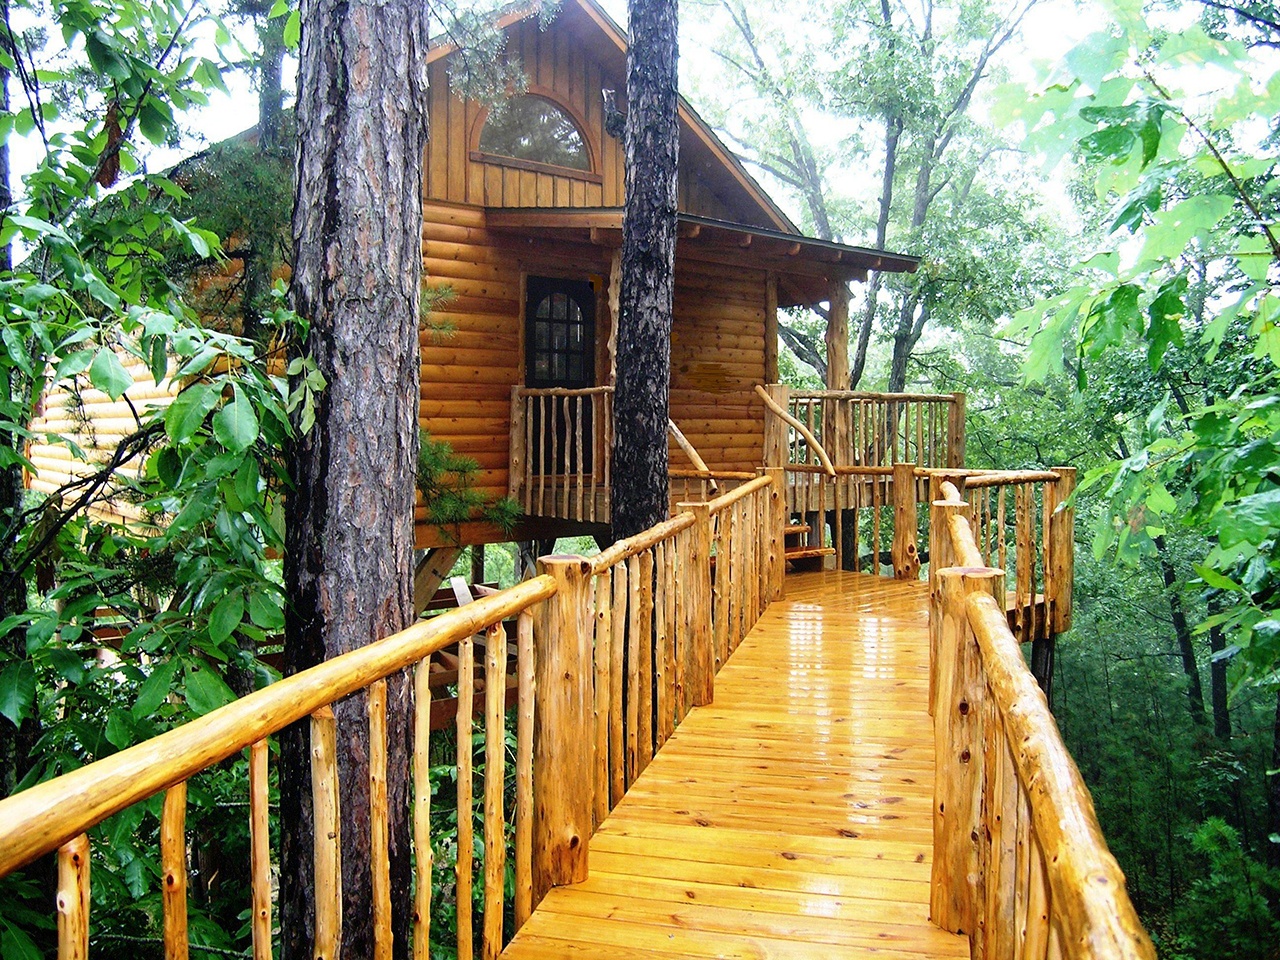 The walkway to the Lofty Lookout Treehouse gets you ready for the inside, which includes a king size bed and a heart-shaped Jacuzzi for two. It’s one of the treehouse or cottage you can book at Treehouse Cottages in Eureka Springs, Arkansas.